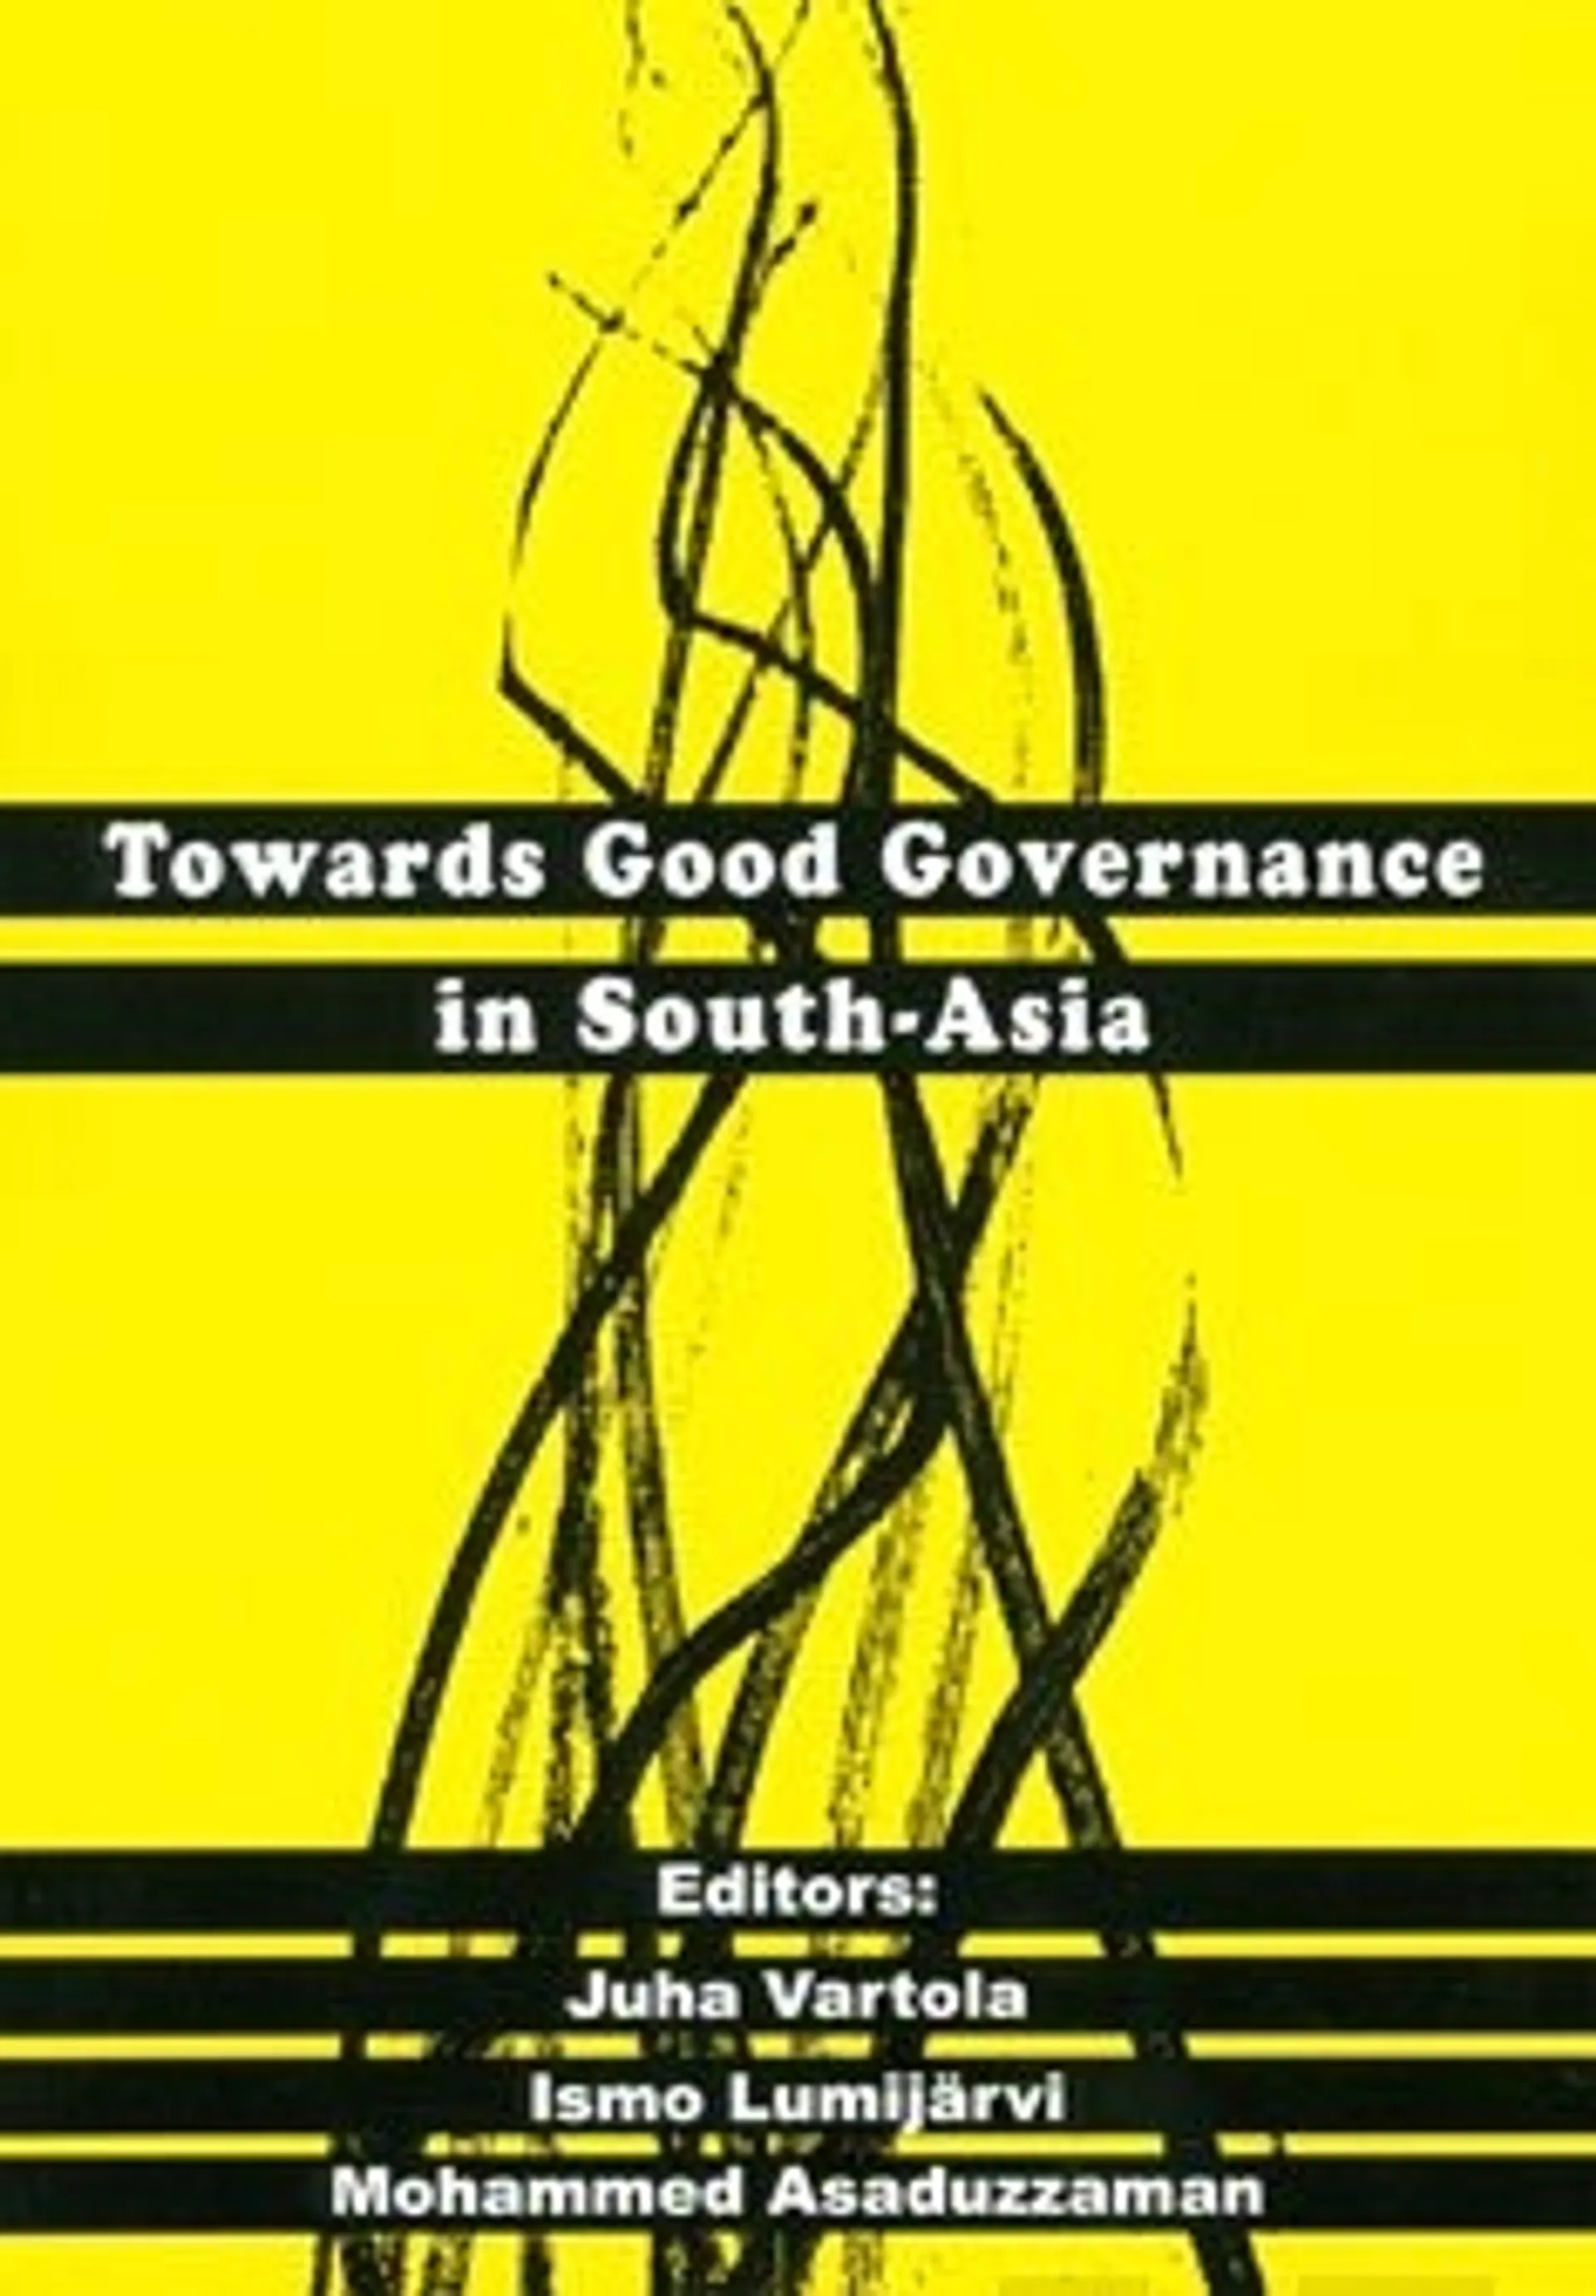 Towards Good Governance in South-Asia